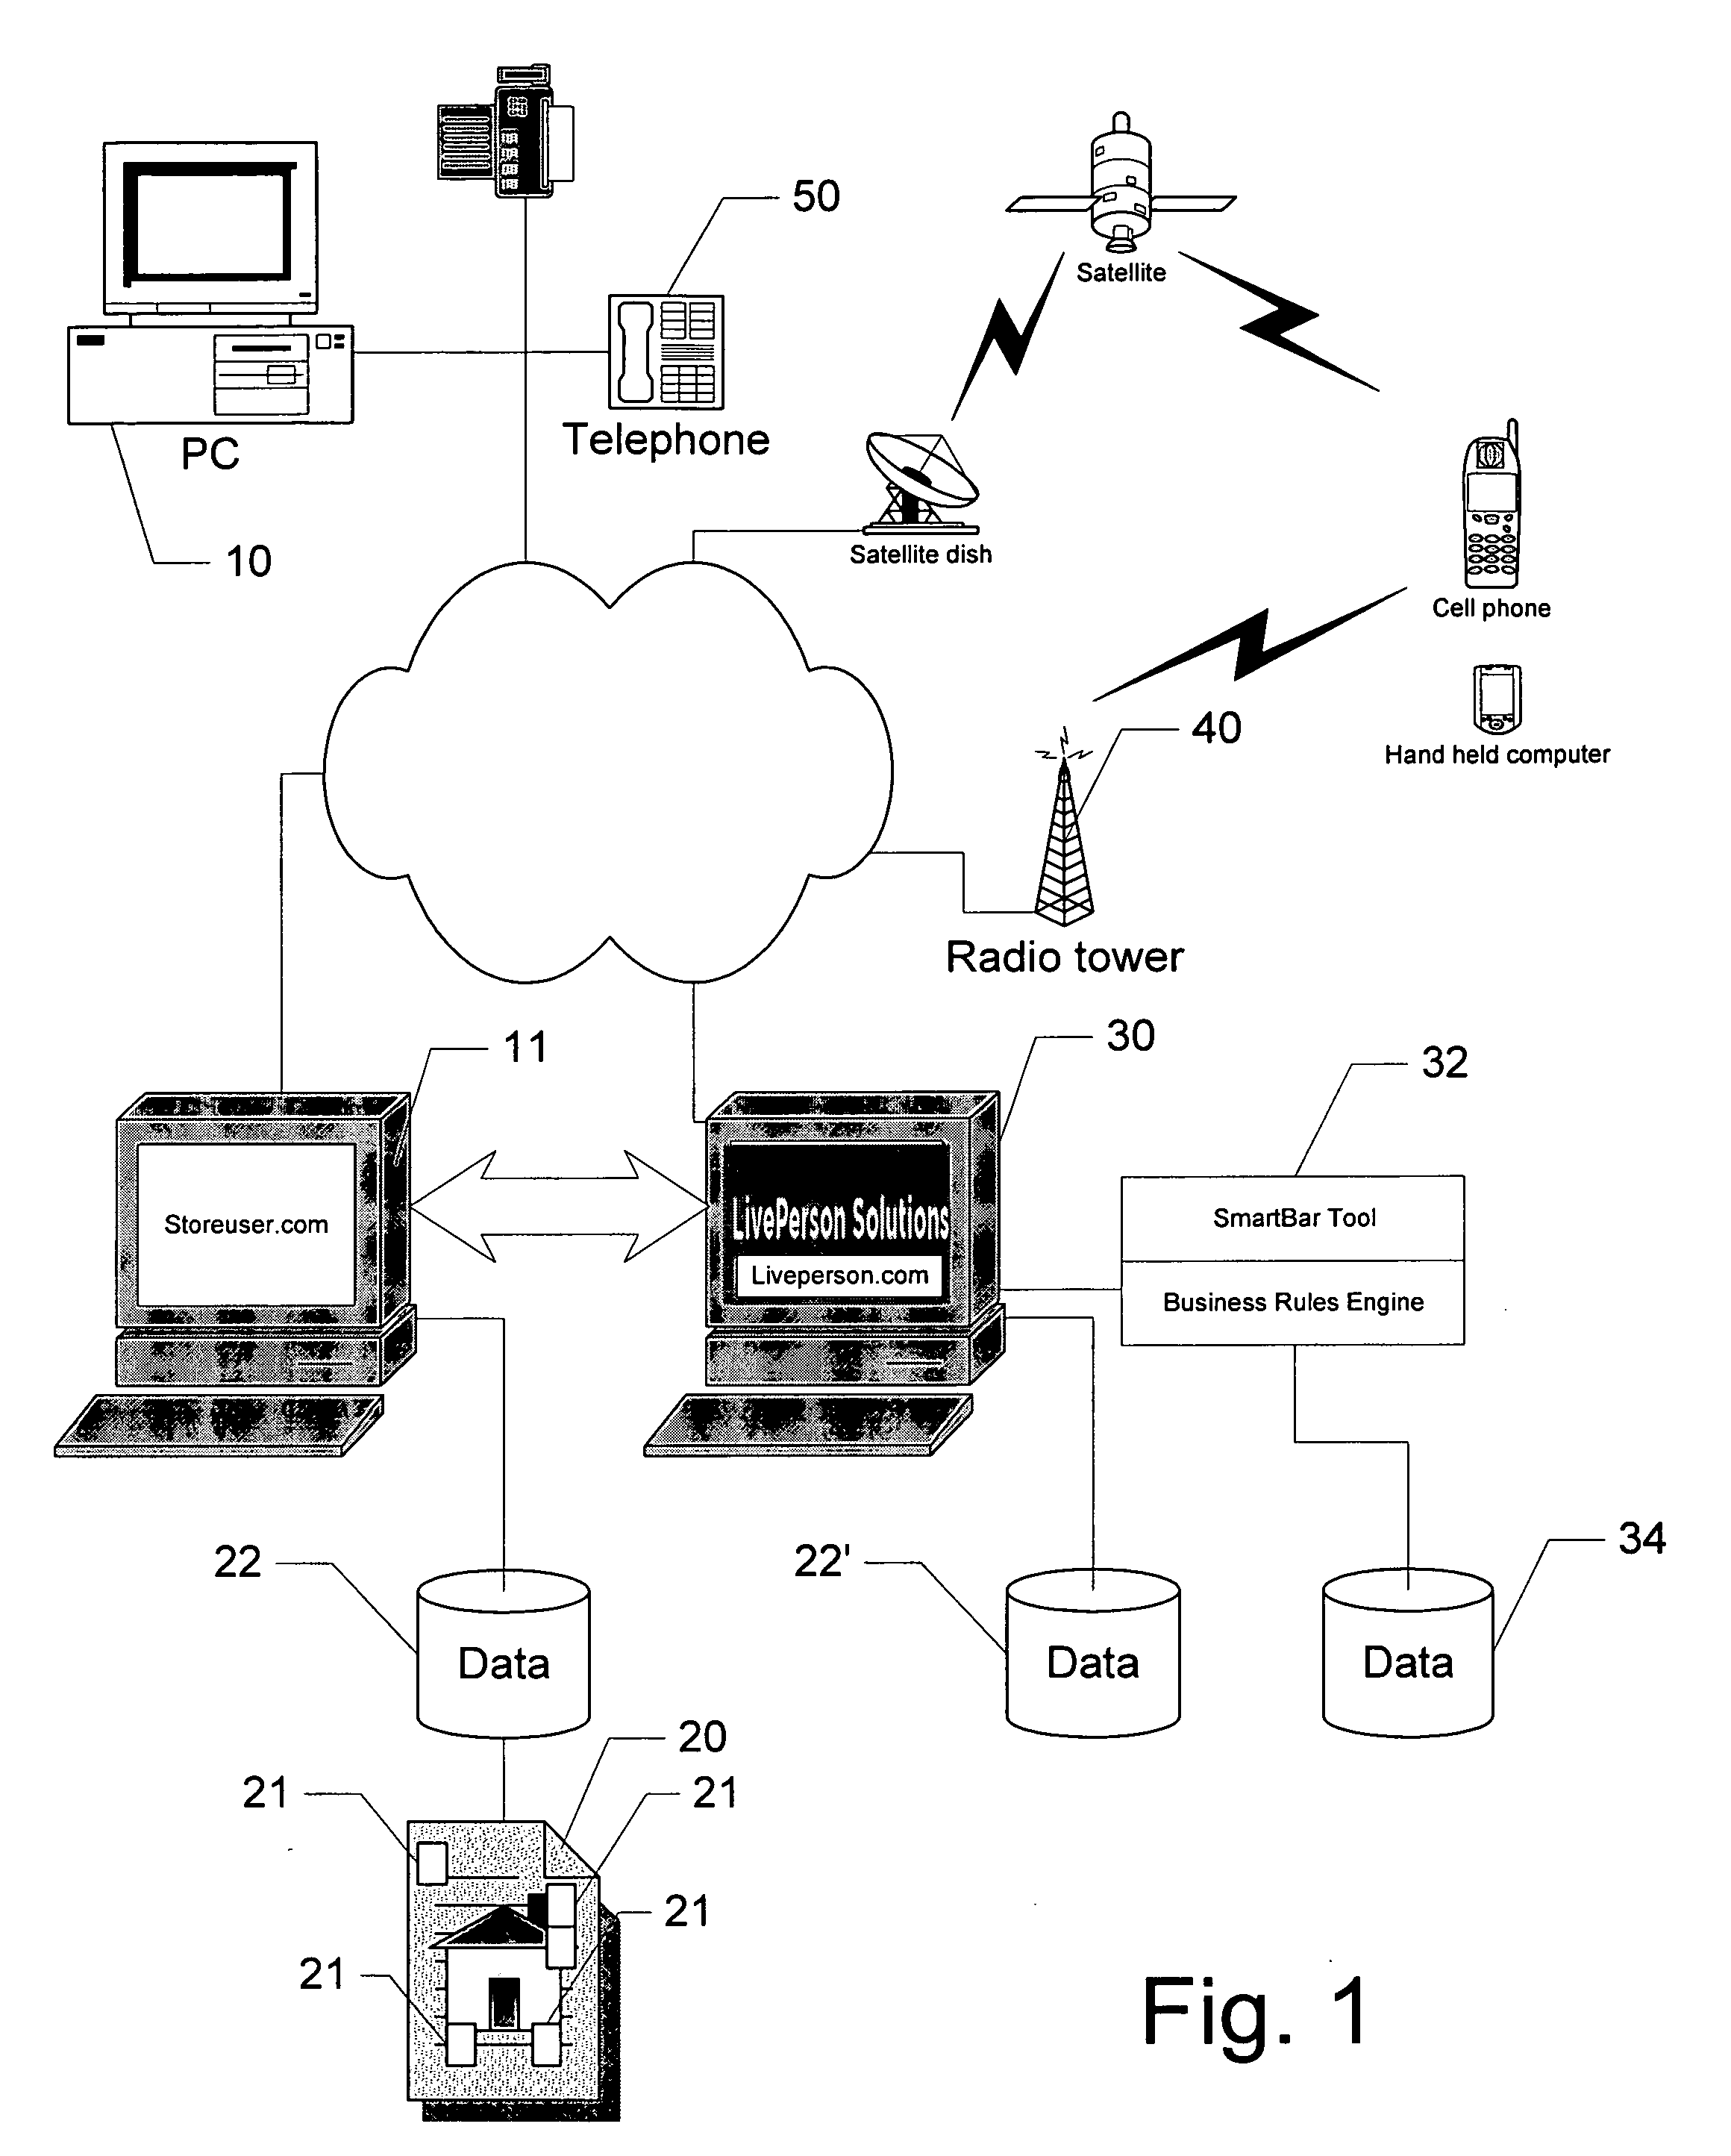 System and method for design and dynamic generation of a web page